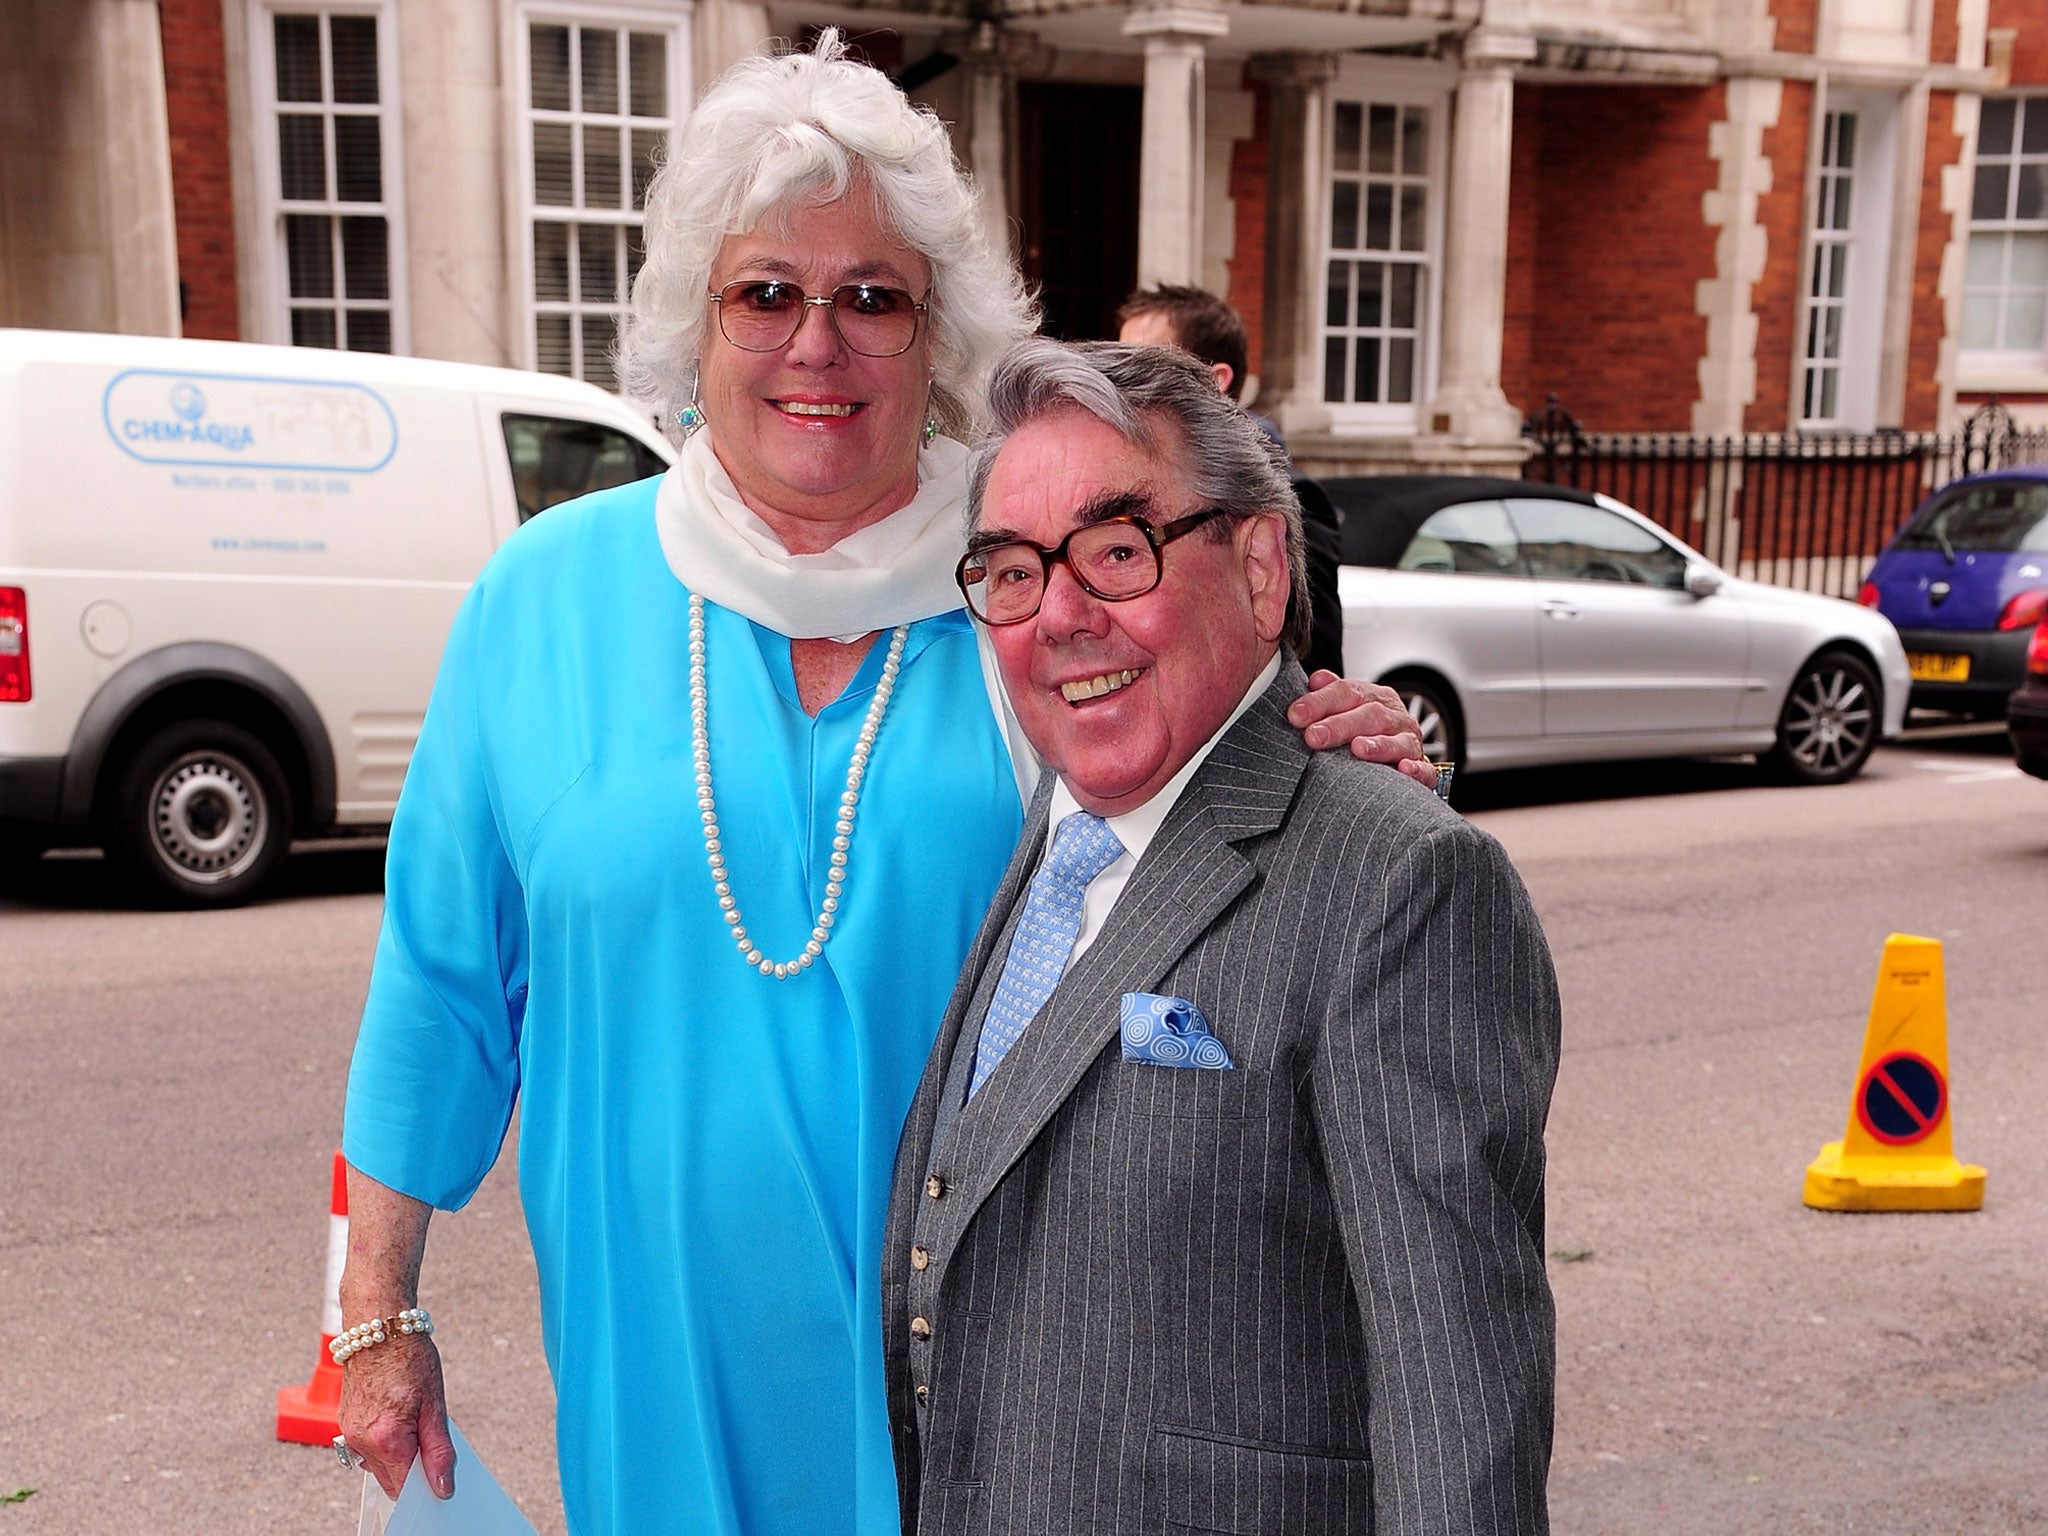 Ronnie Corbett and wife Anne Hart attend the wedding of David Walliams and Lara Stone at Claridge's Hotel on May 16, 2010 in London, England.